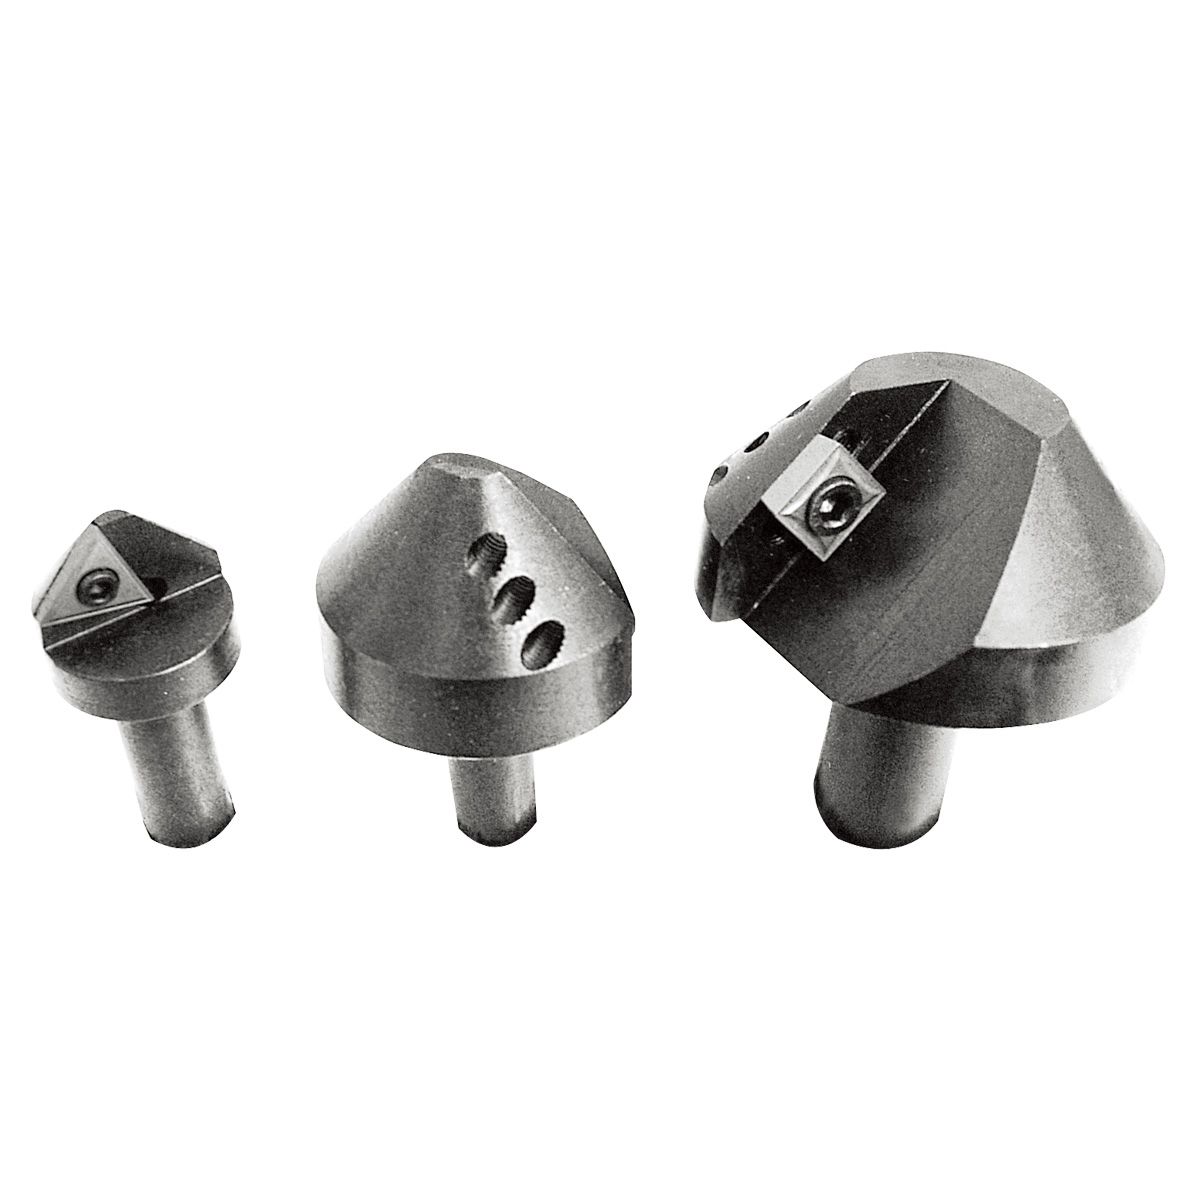 3 PIECE 60 DEGREE INDEXABLE COUNTERSINK & CHAMFER TOOL SET (2001-0010)